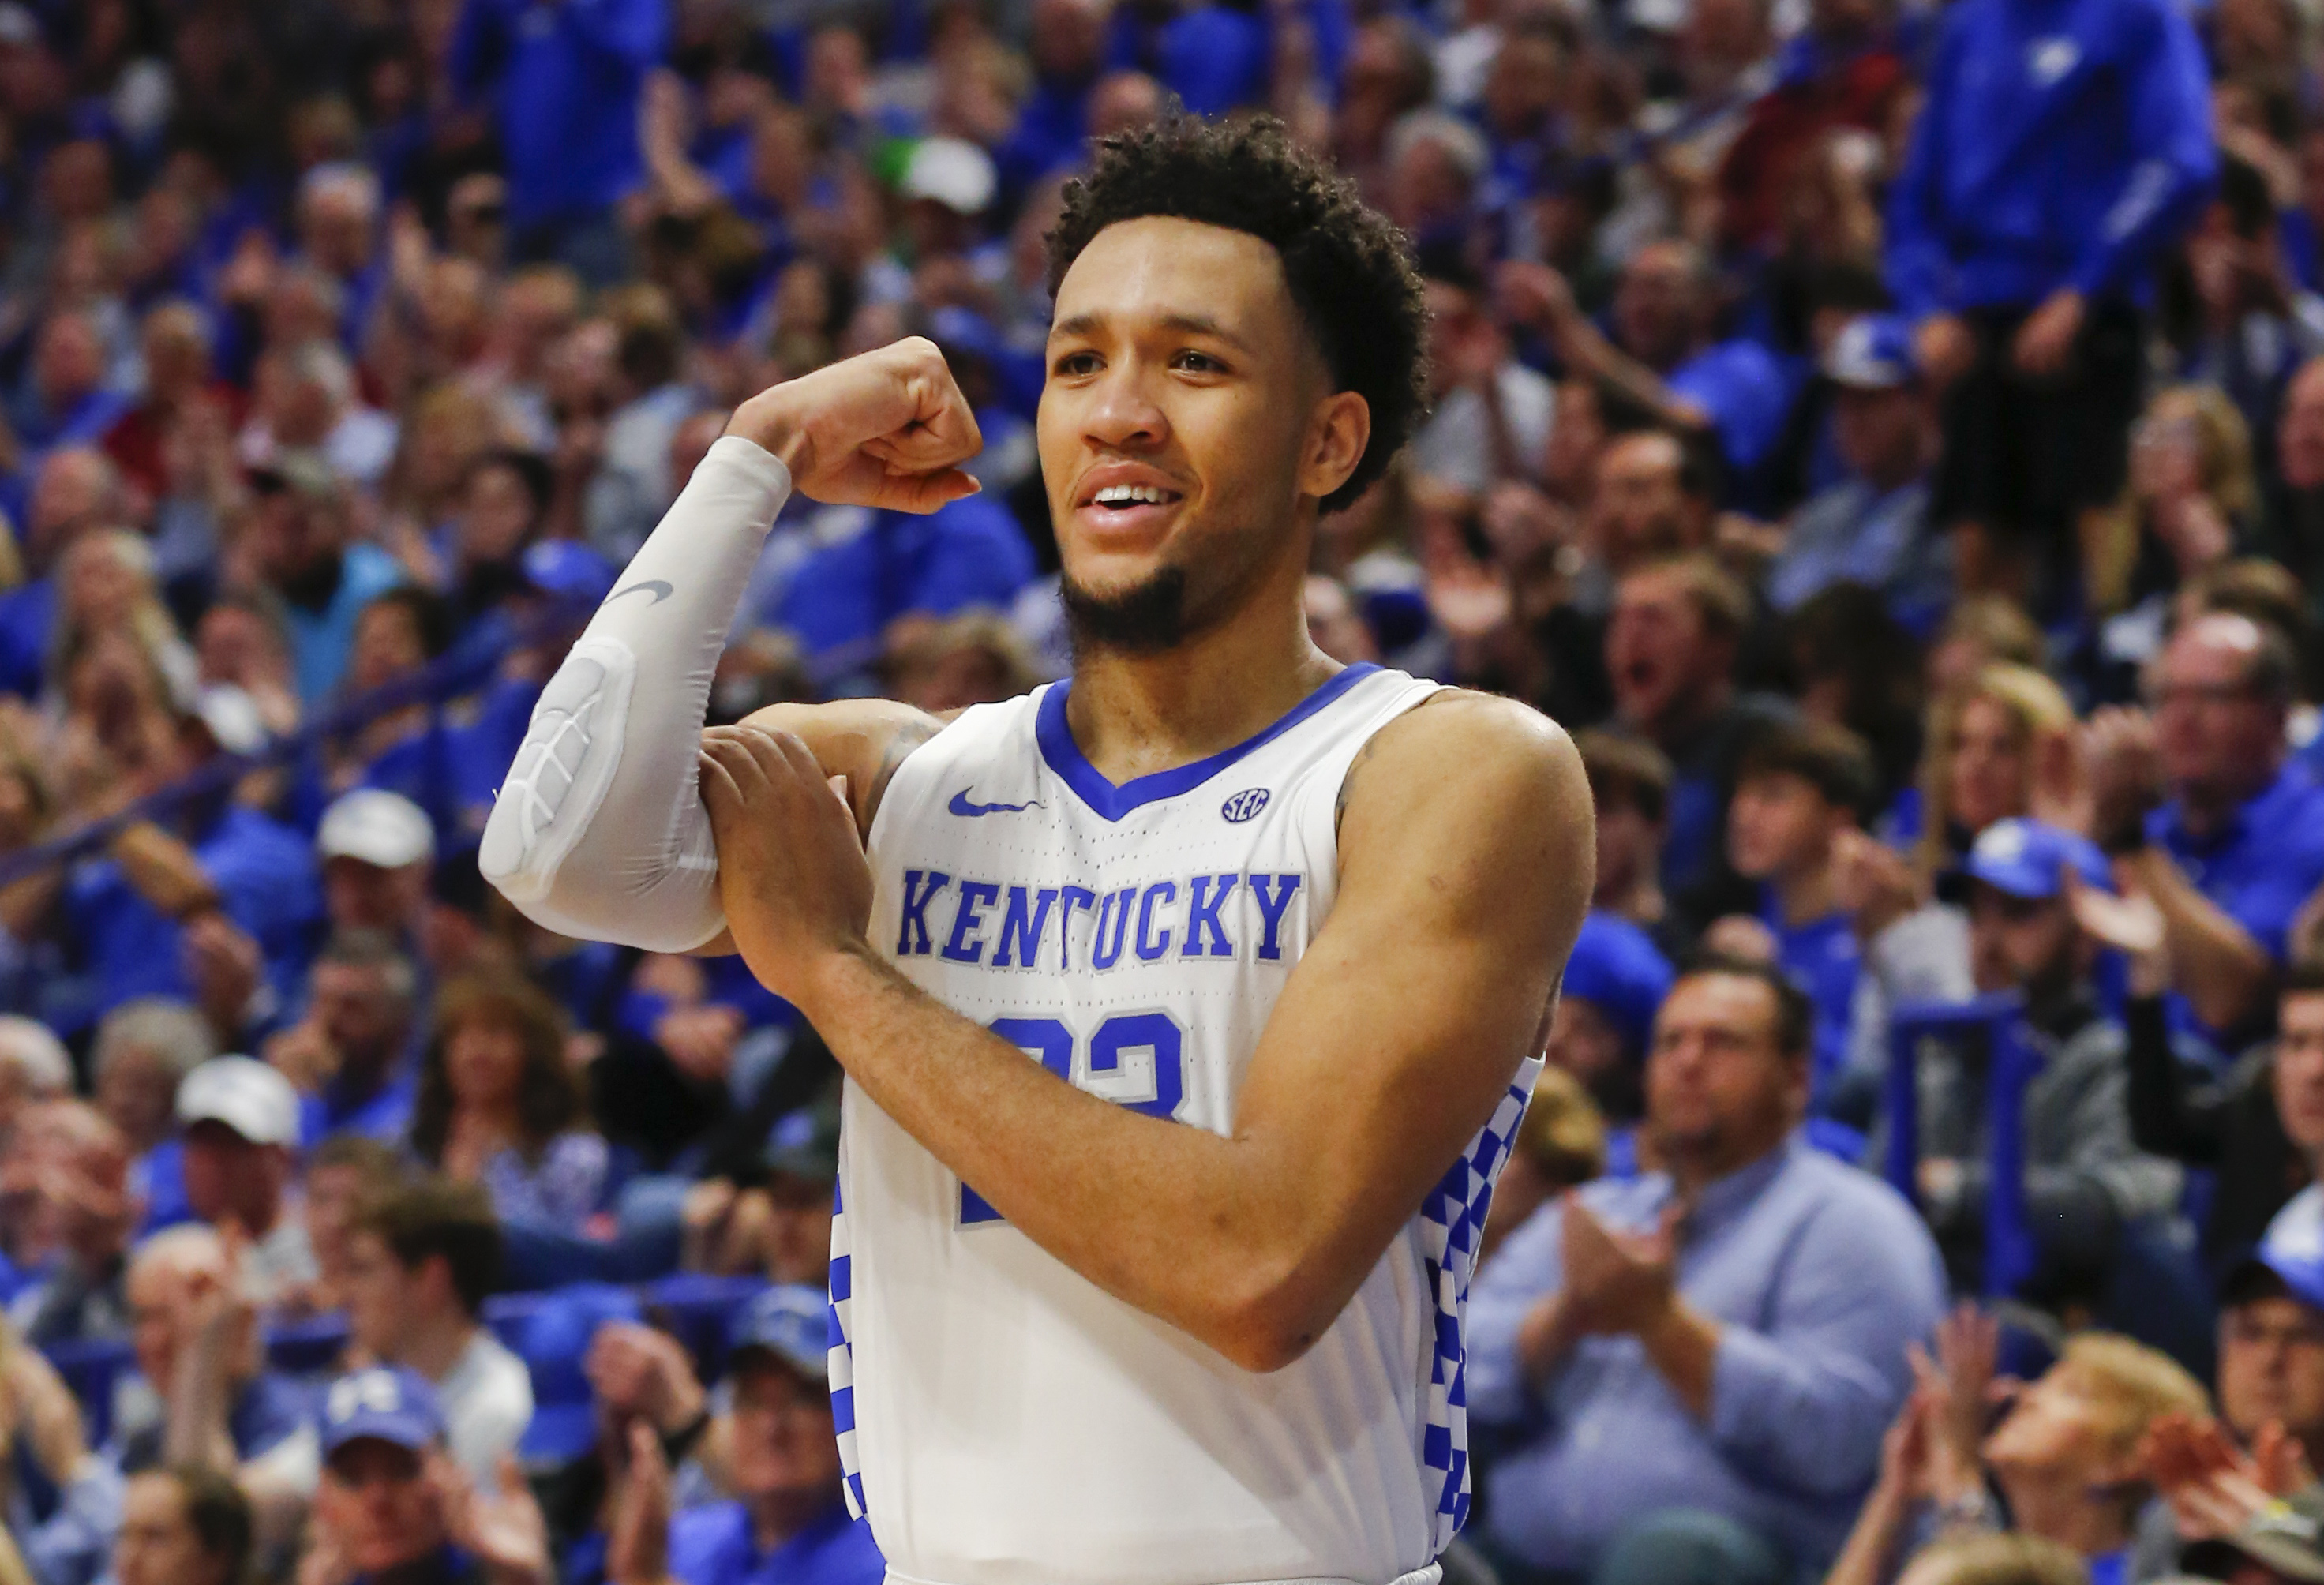 Tracking the NBA draft stock of the top Kentucky Wildcats’ prospects